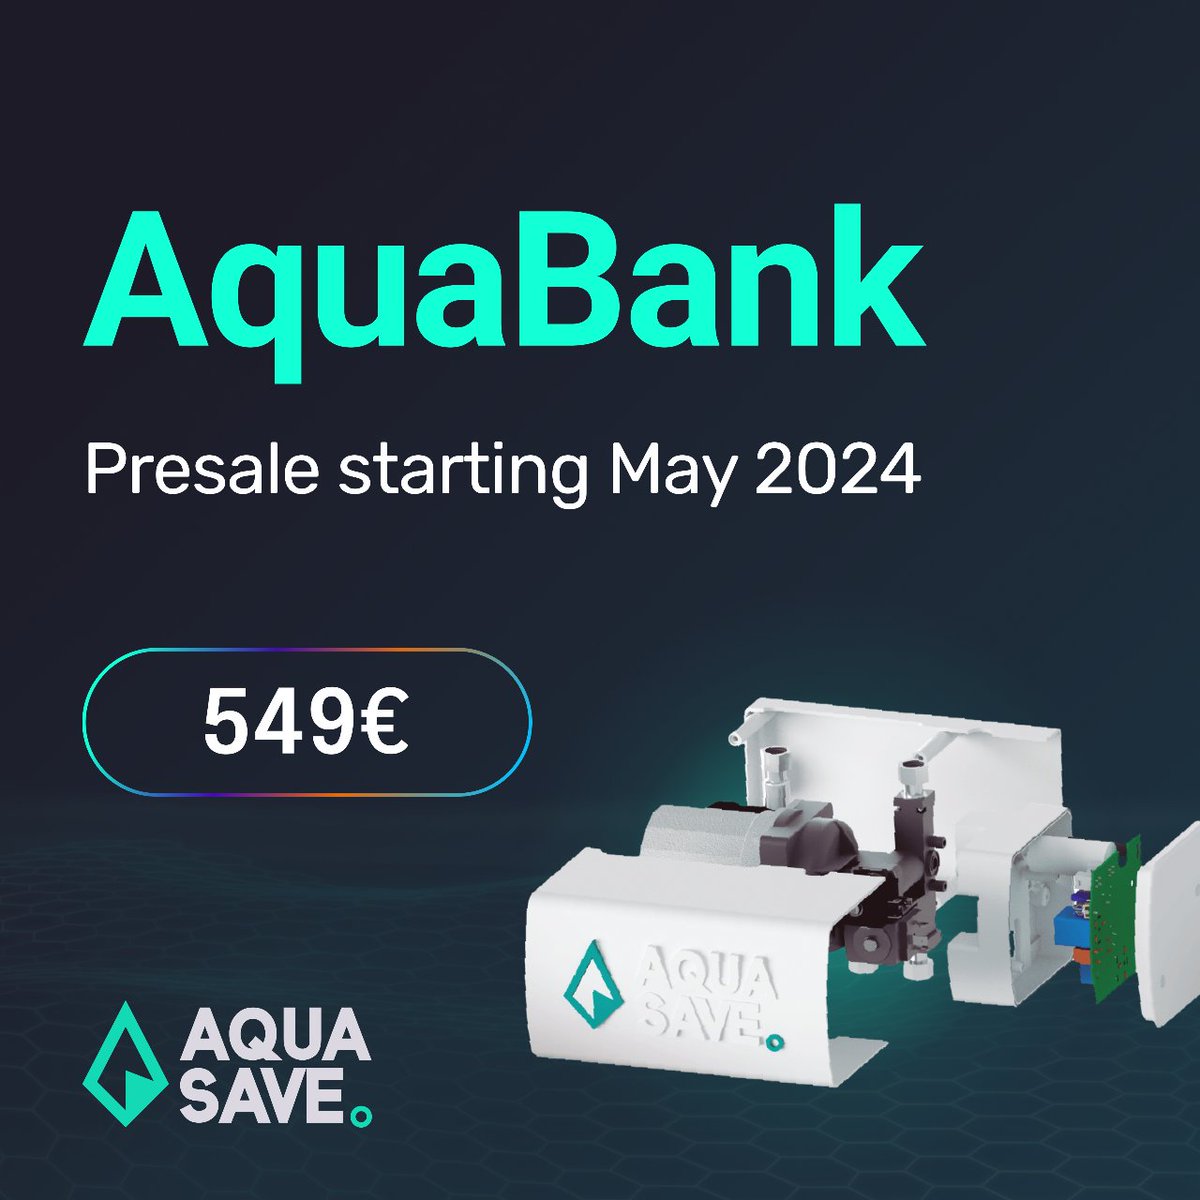 🌊 Exciting news! Our AquaBank is launching soon, with pre-sale kicking off in May 2024. Secure your spot at a special price of 549€. Subscribe to the whitelist on our website to be the first to lay a hand on one of our Aquabanks. Don't miss this exclusive opportunity! 💧